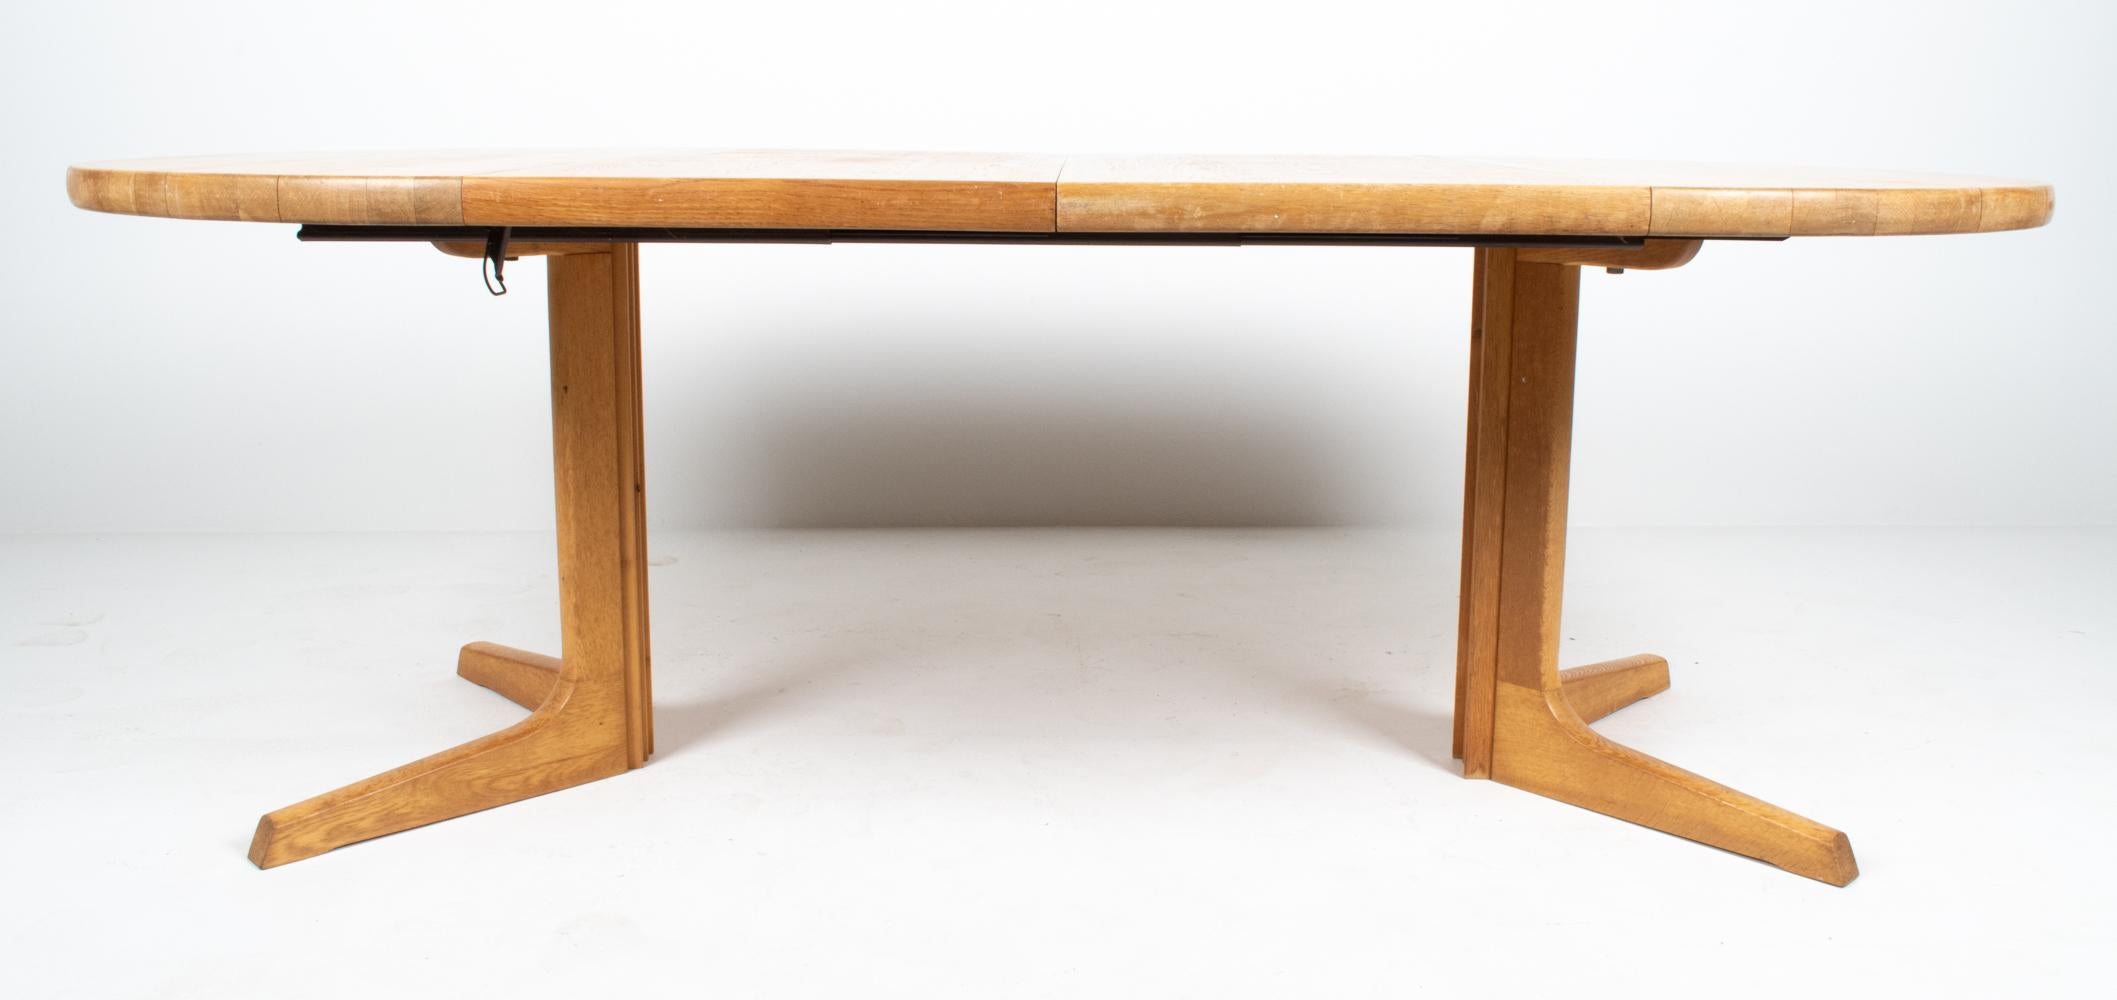 Oak Mid-Century Modern Extendable Dining Room Table by Niels Otto Møller, 1970s For Sale 11